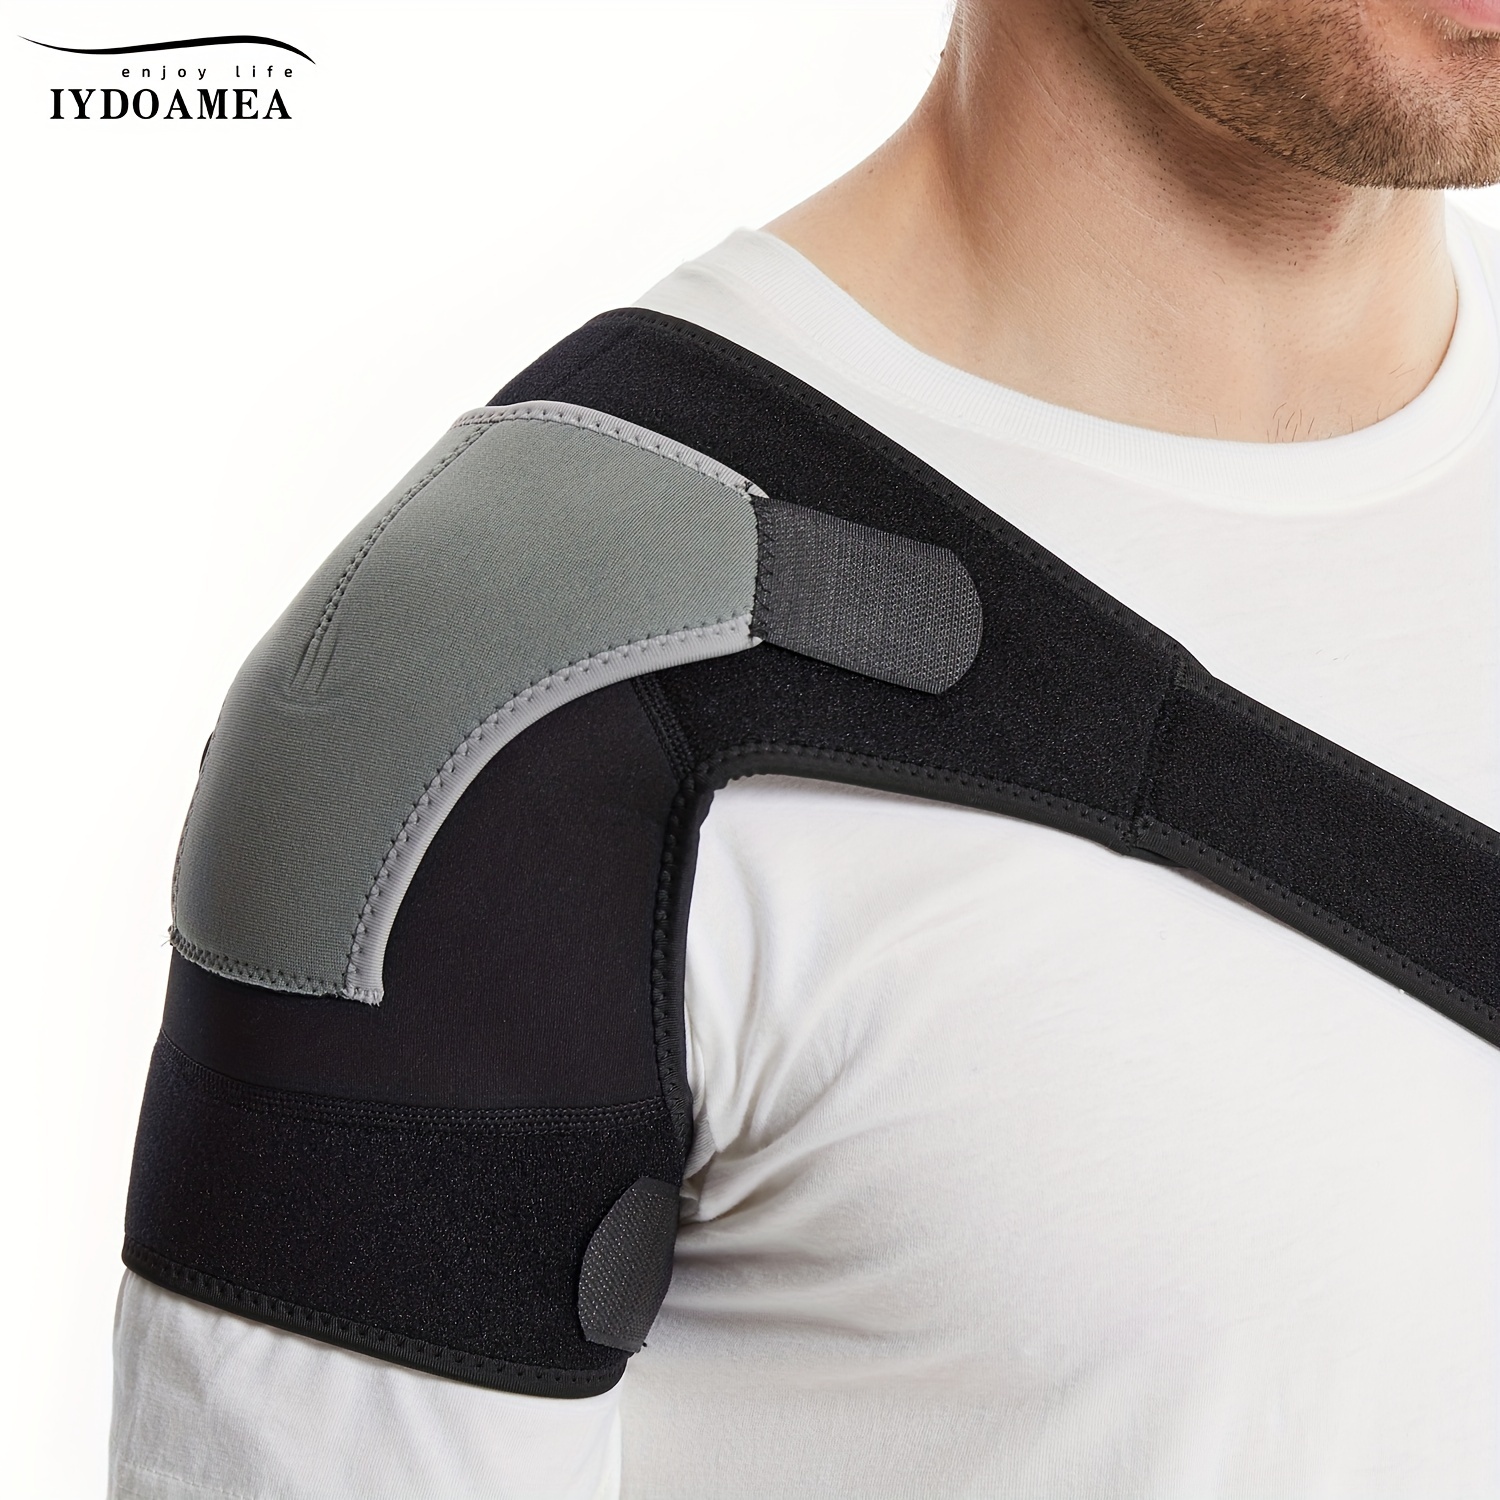 Shoulder Brace for Men and Women - Rotator Cuff Support Brace With